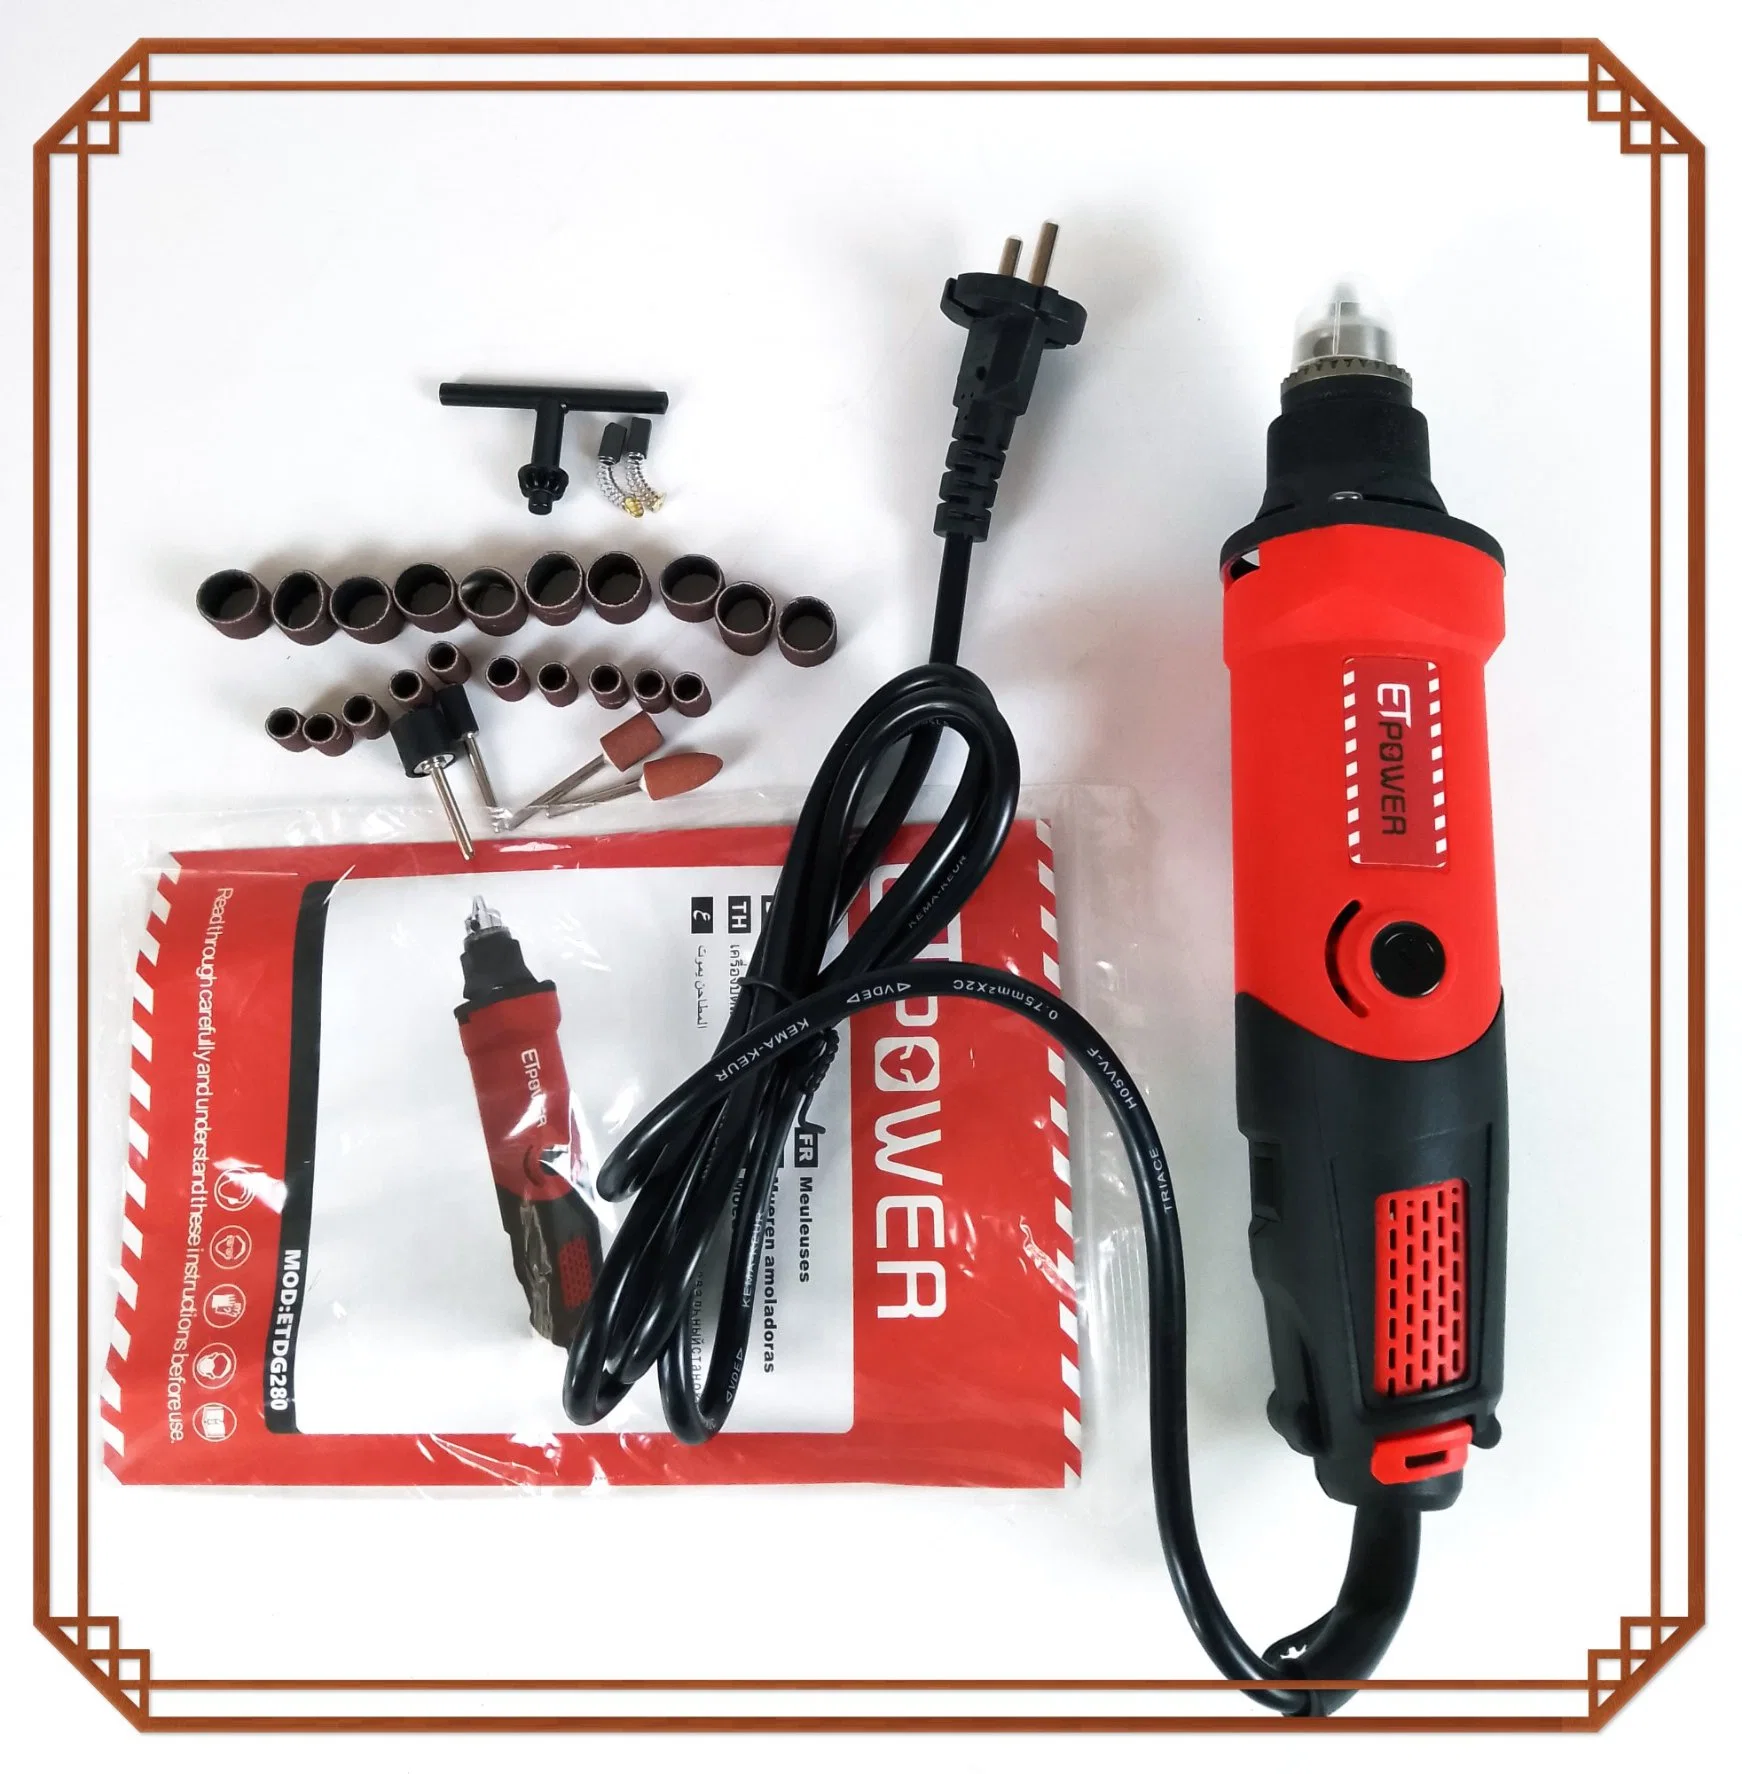 Etpower 280W Engraving Electric Drill Electric Grinder Grinding Hardware Tools